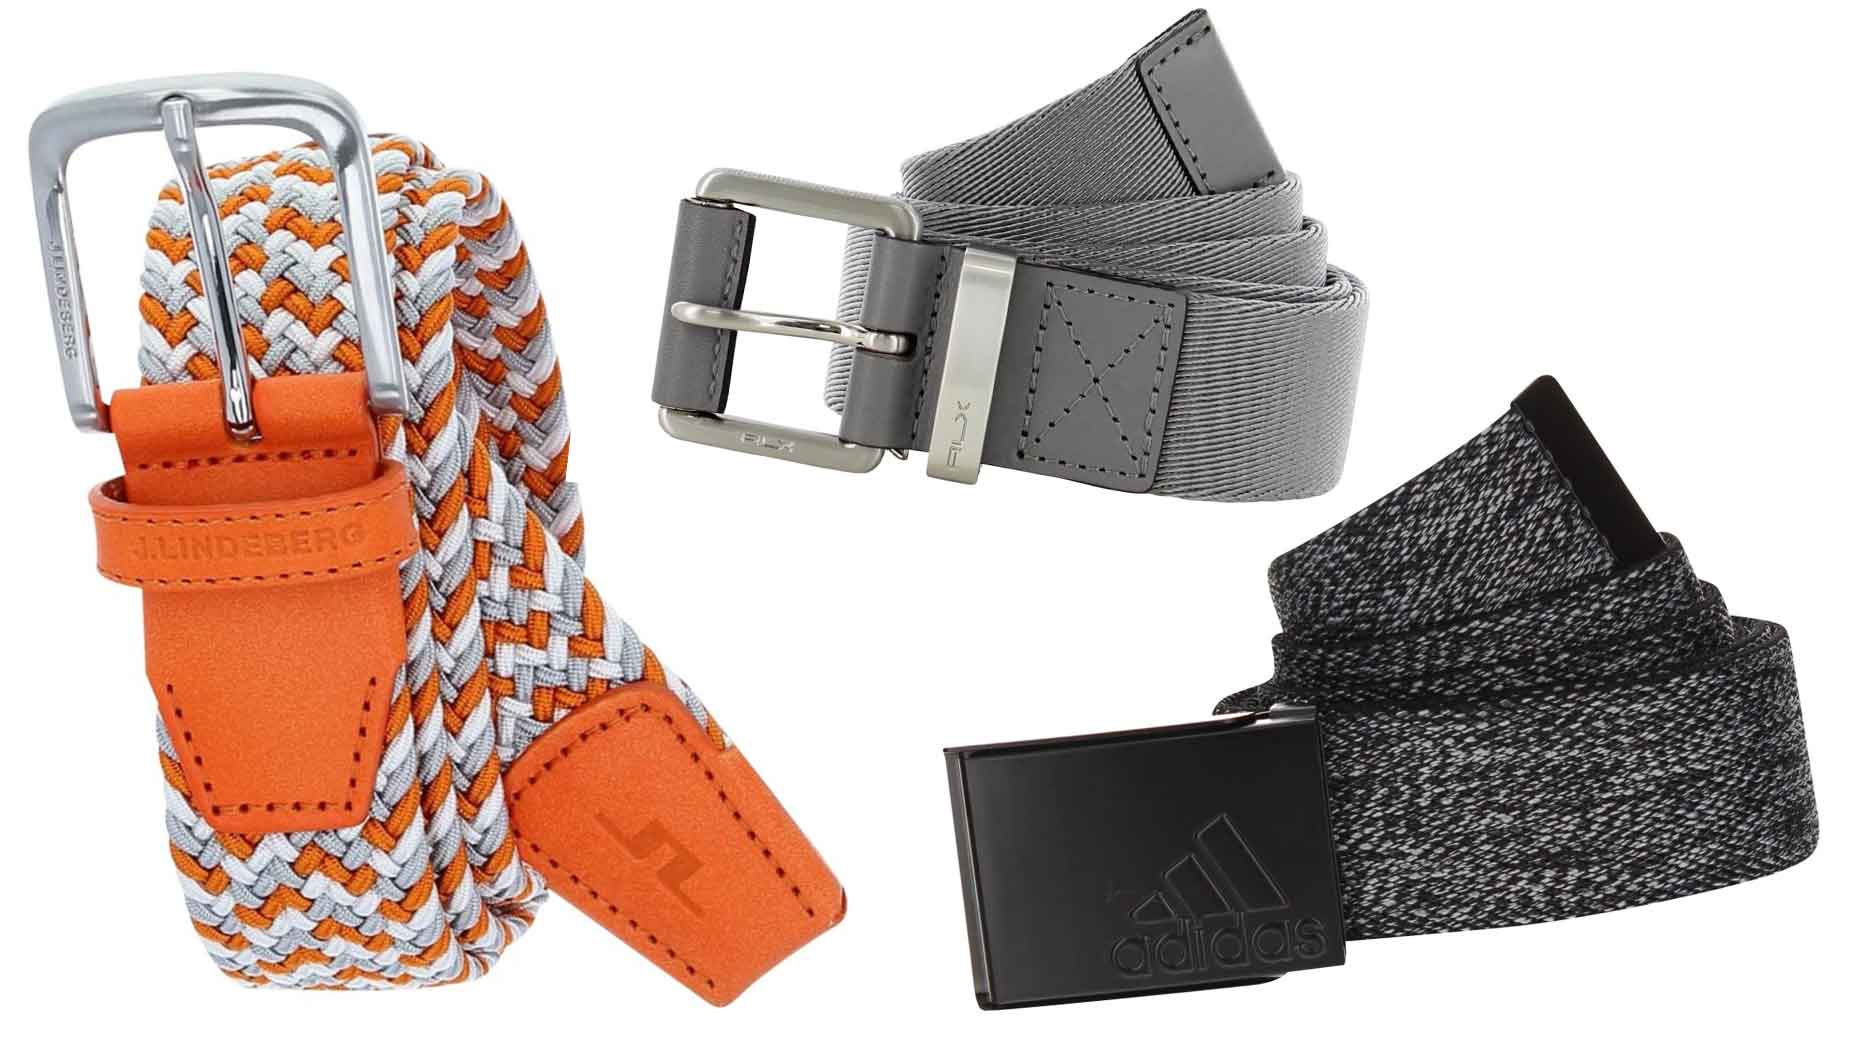 Check out these 7 colorful golf belts that are anything but basic